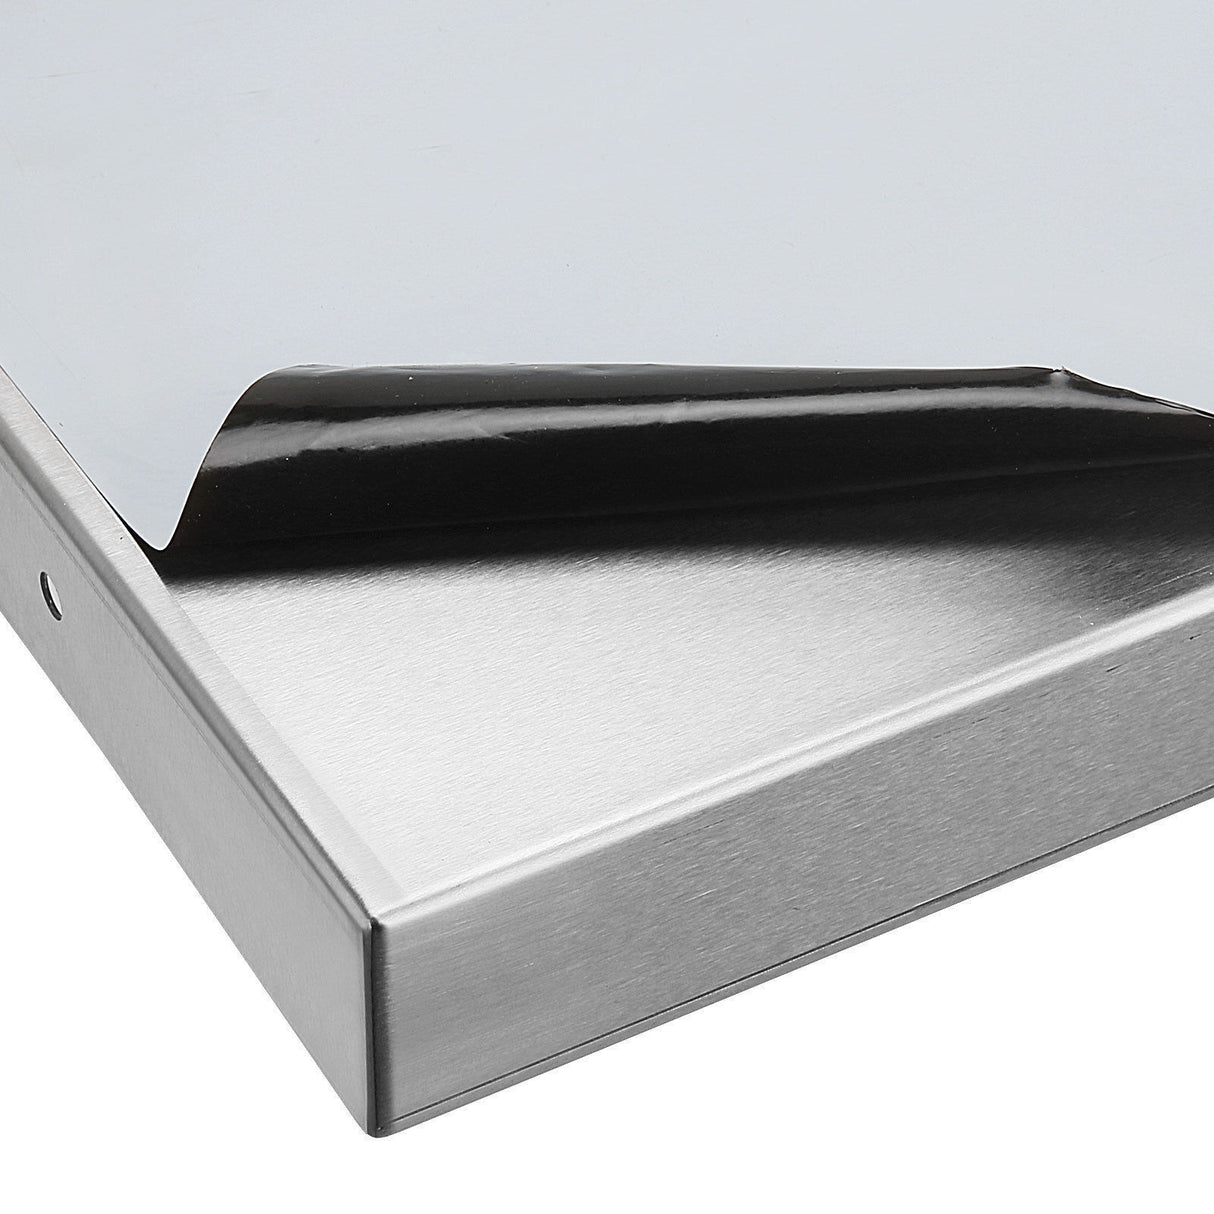 Empire Stainless Steel Wall Shelf 1500 x 300mm with Brackets & Fixings - WS-1500 Stainless Steel Wall Shelves Empire   